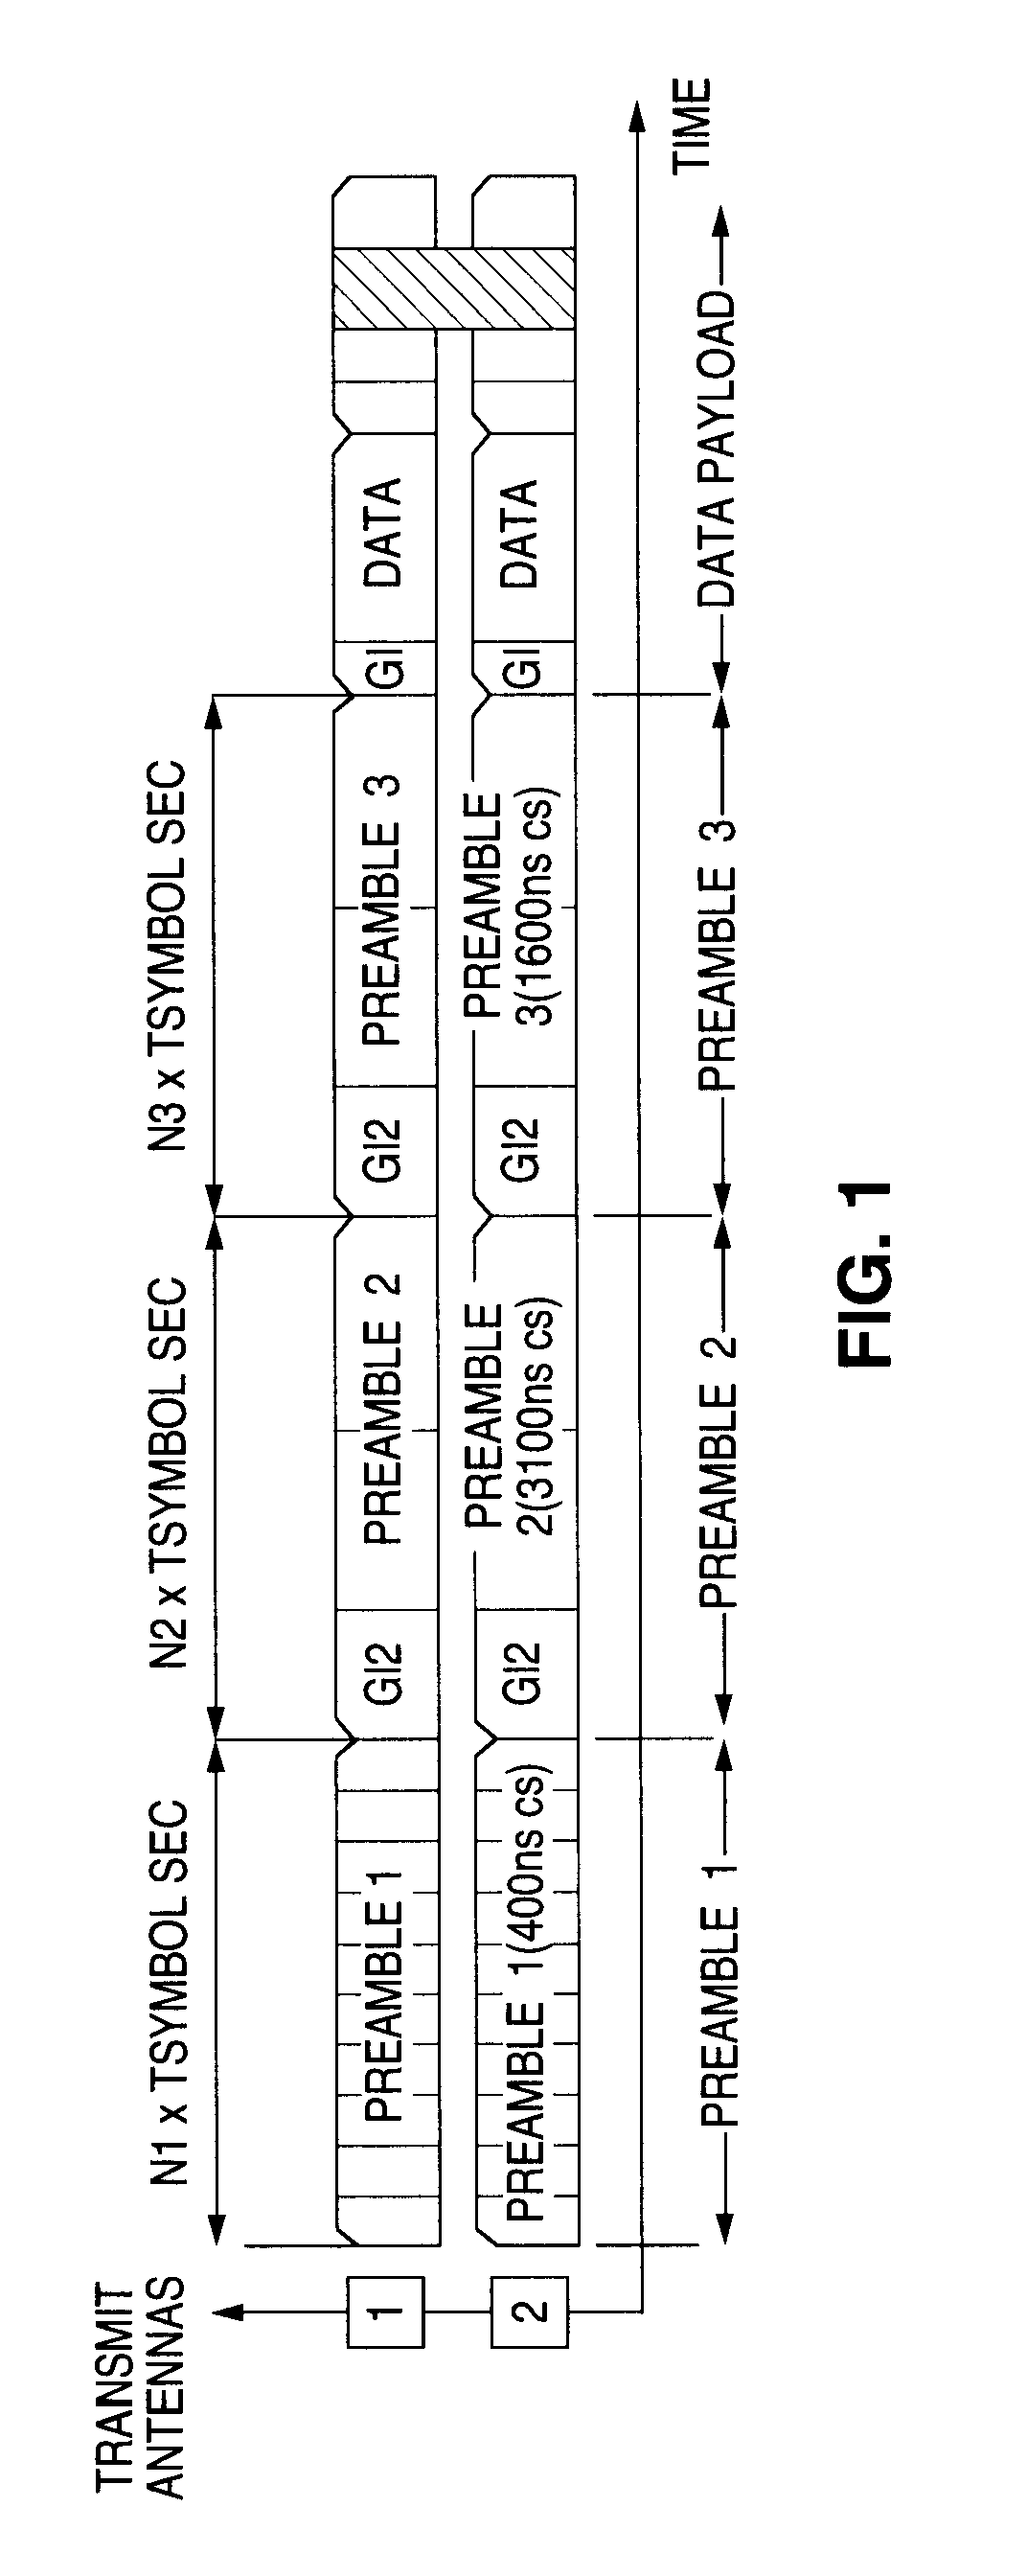 Apparatus and method for simultaneous testing of multiple orthogonal frequency division multiplexed transmitters with single vector signal analyzer